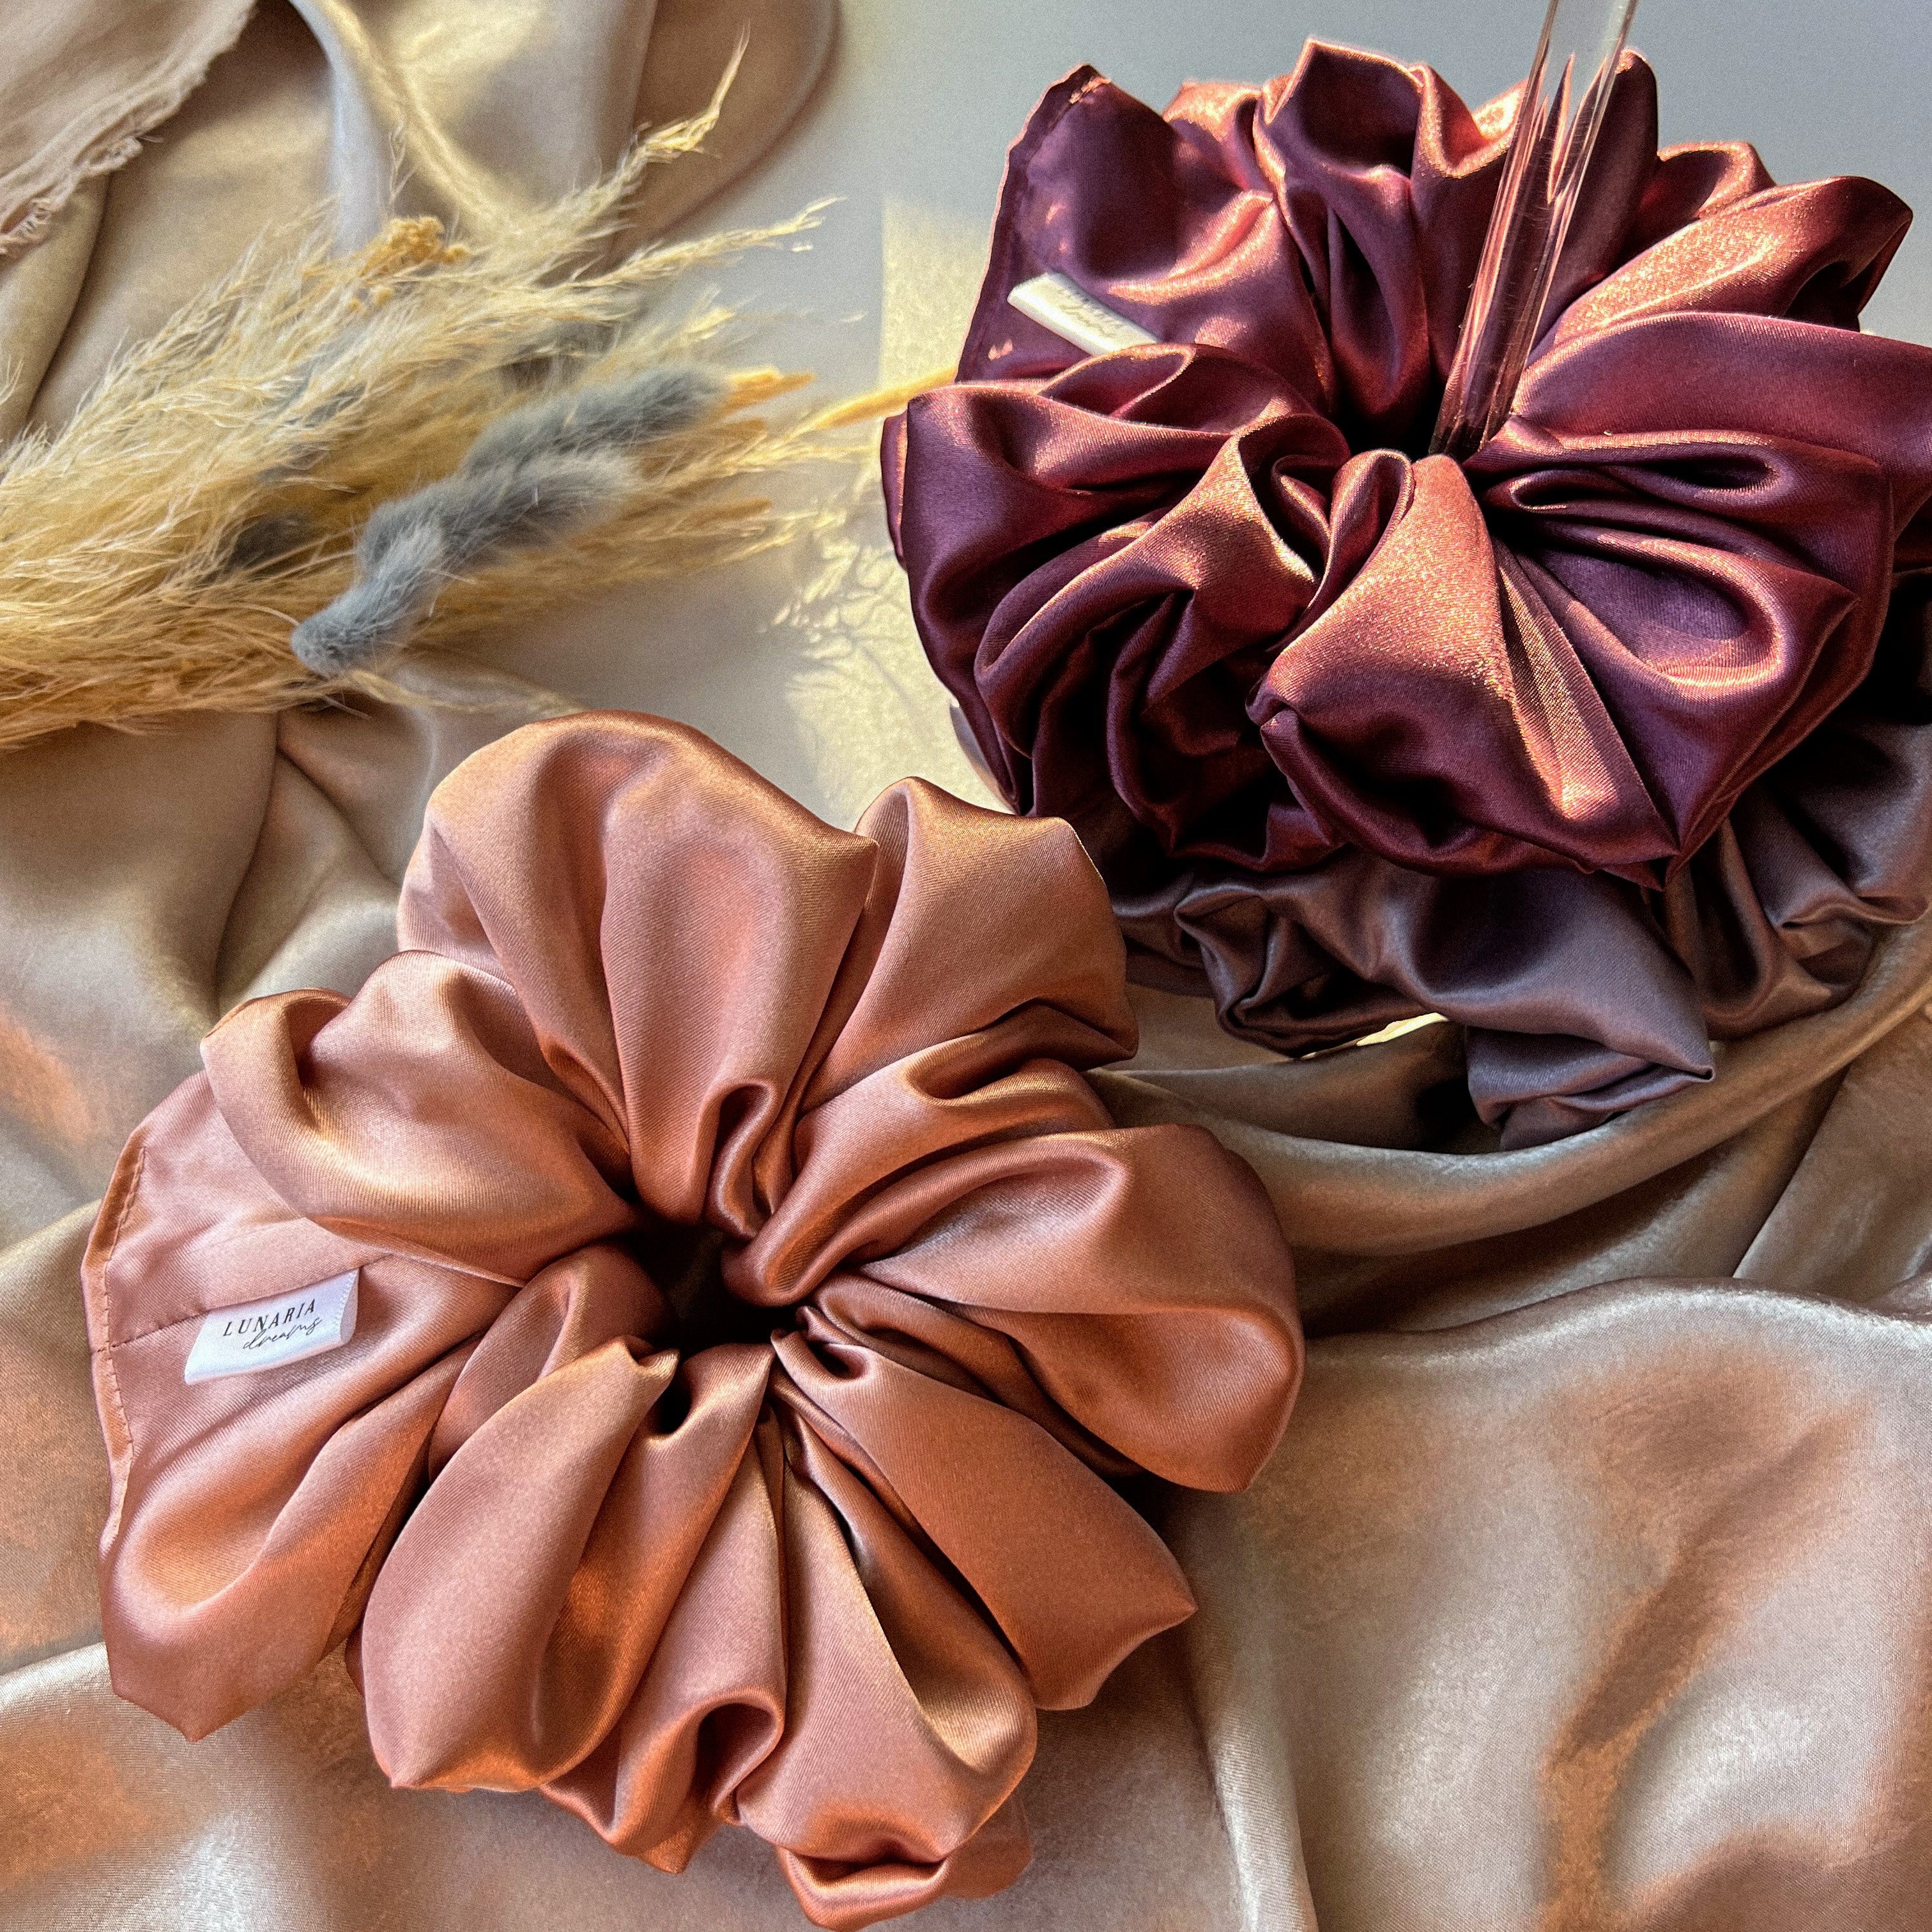 Fameza Satin Silk Scrunchies for hair Big Hair Scrunchies Satin Hair Ties  Ponytail Holder No Hurt Your Hair PACK of 3 Rubber Band Price in India   Buy Fameza Satin Silk Scrunchies